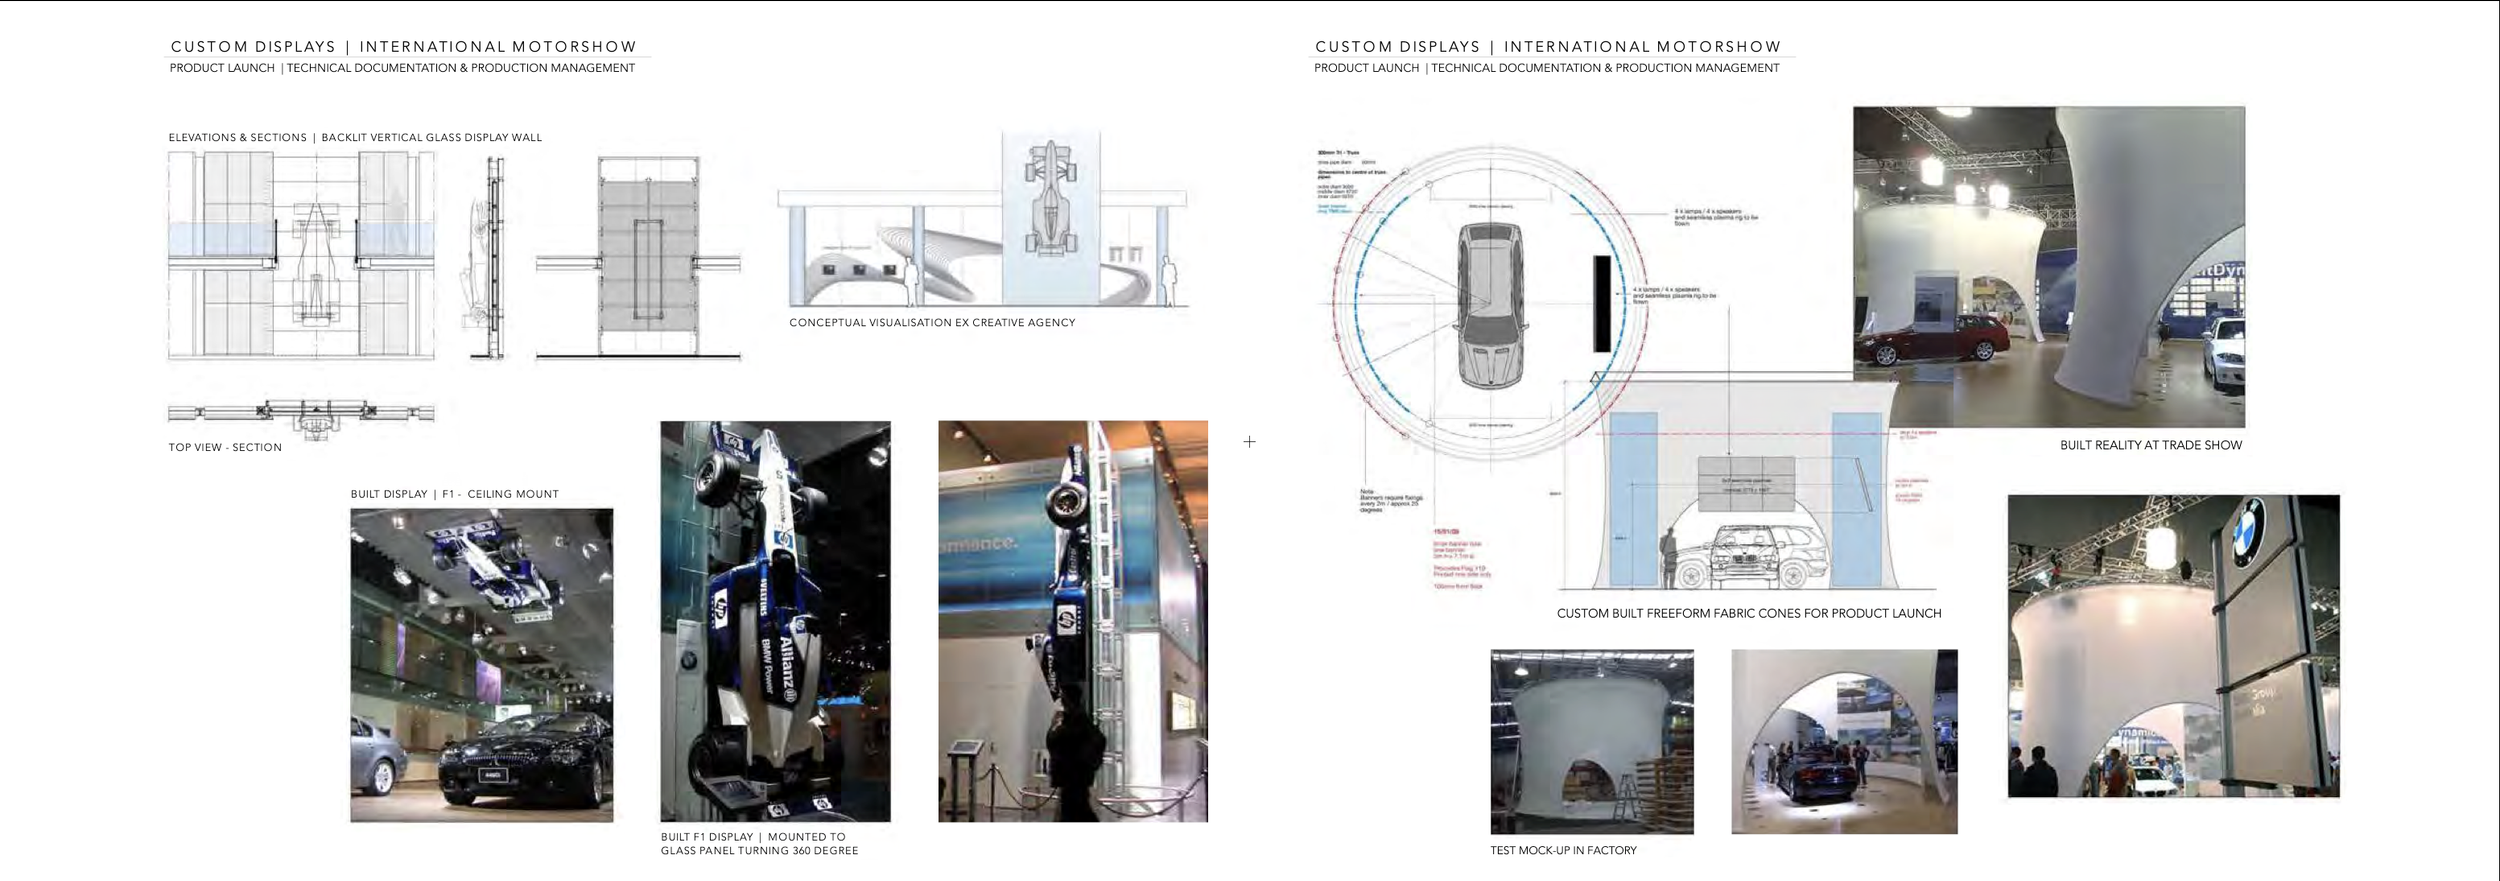 Grethe+Connerth+Twinmotion+Vectorworks+Real Time Visualisations+Archviz+Trade+Show+Expo+Booth+Exhibition+Design+Digital+Banner+Print+Expo+Booth+Gallery+Museum+Retail+Brand+Academy+Commercial+Event+Environment+Displays+Signage+TradeShow+BMW.png